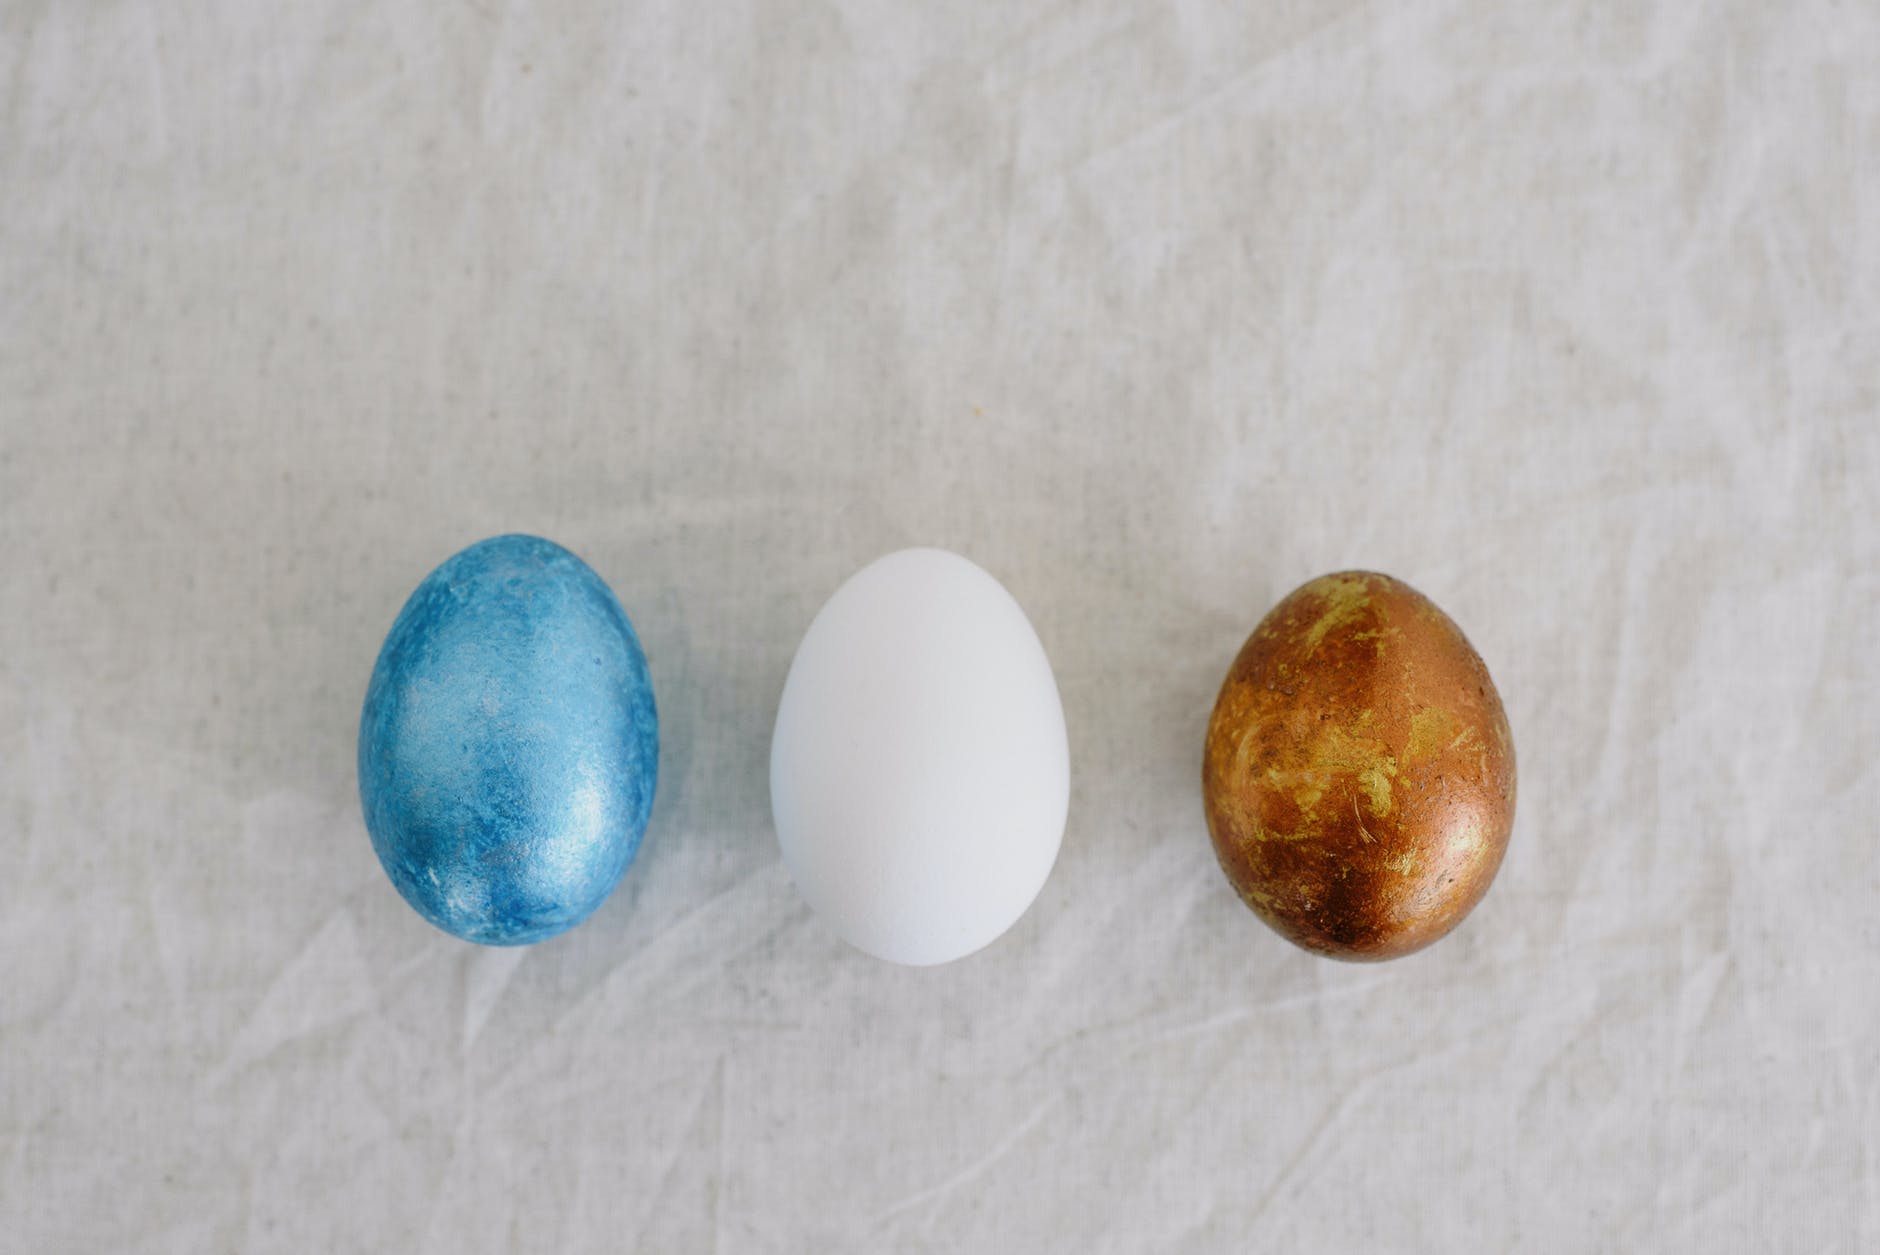 eggs in different colors